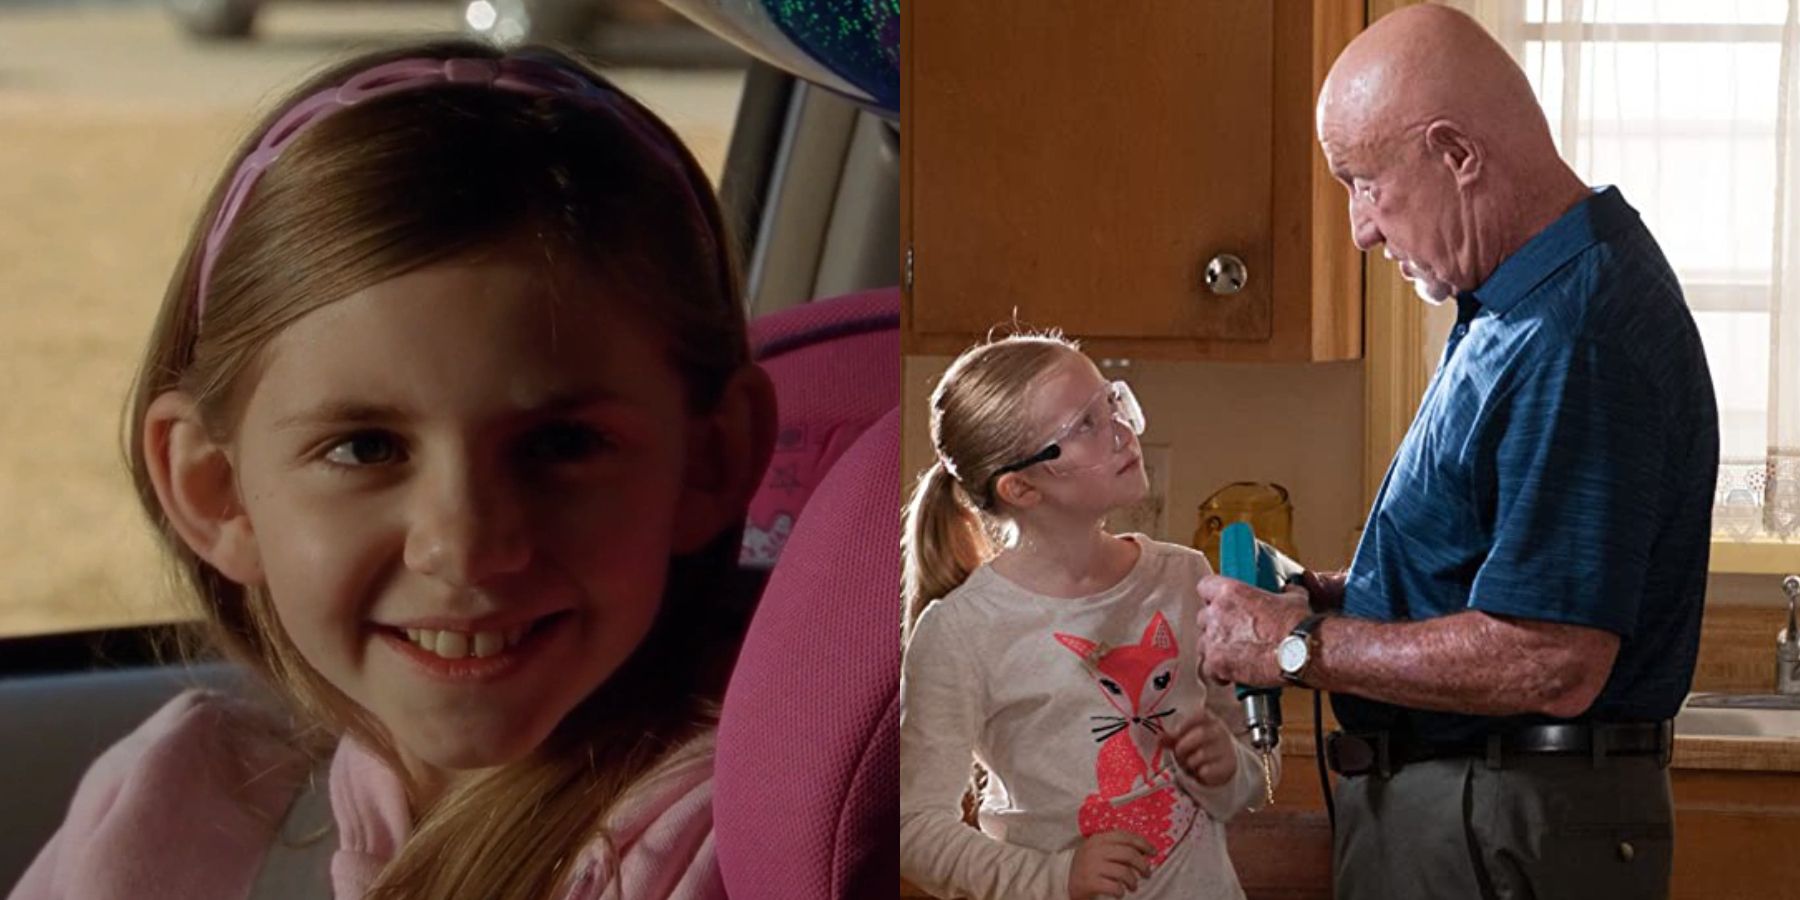 Mike's granddaughter in Breaking Bad and Better Call Saul